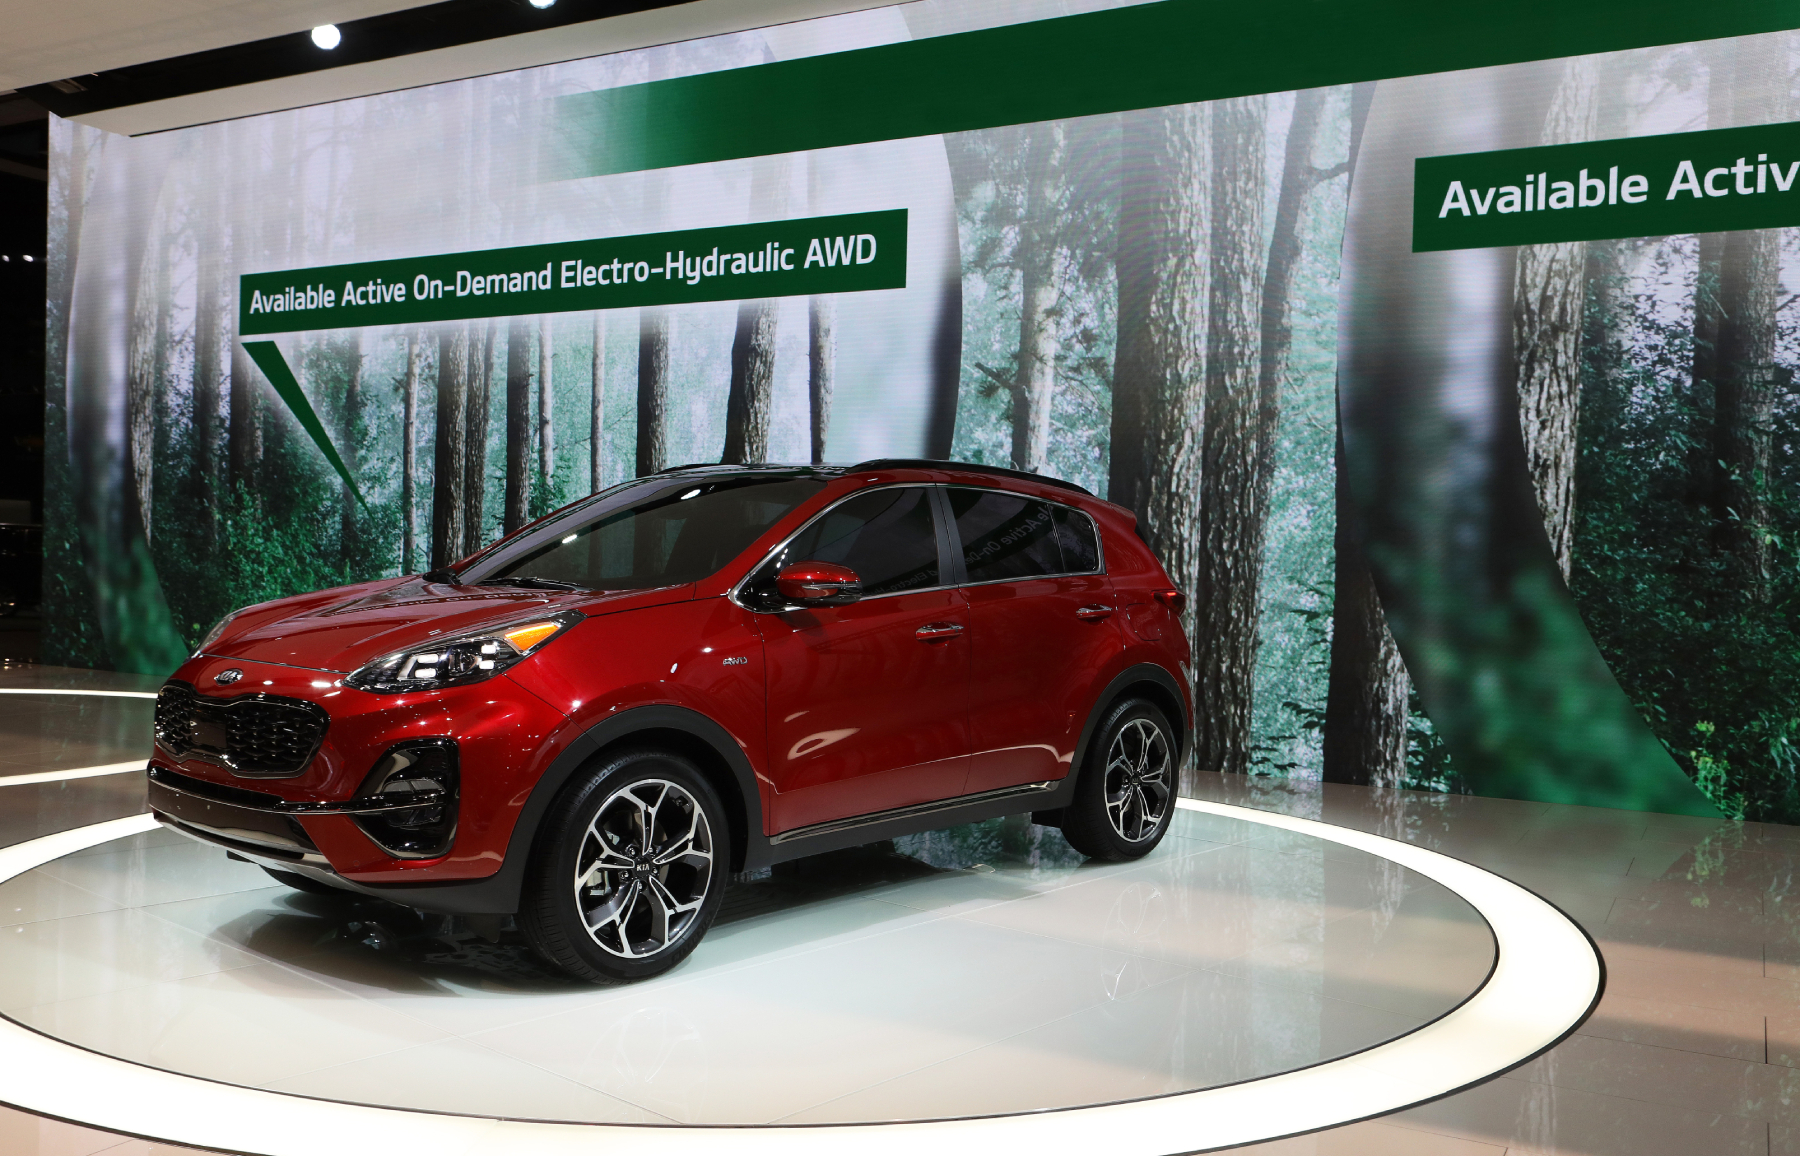 A Kia Sportage on display at an auto show advertising its available all-wheel-drive system